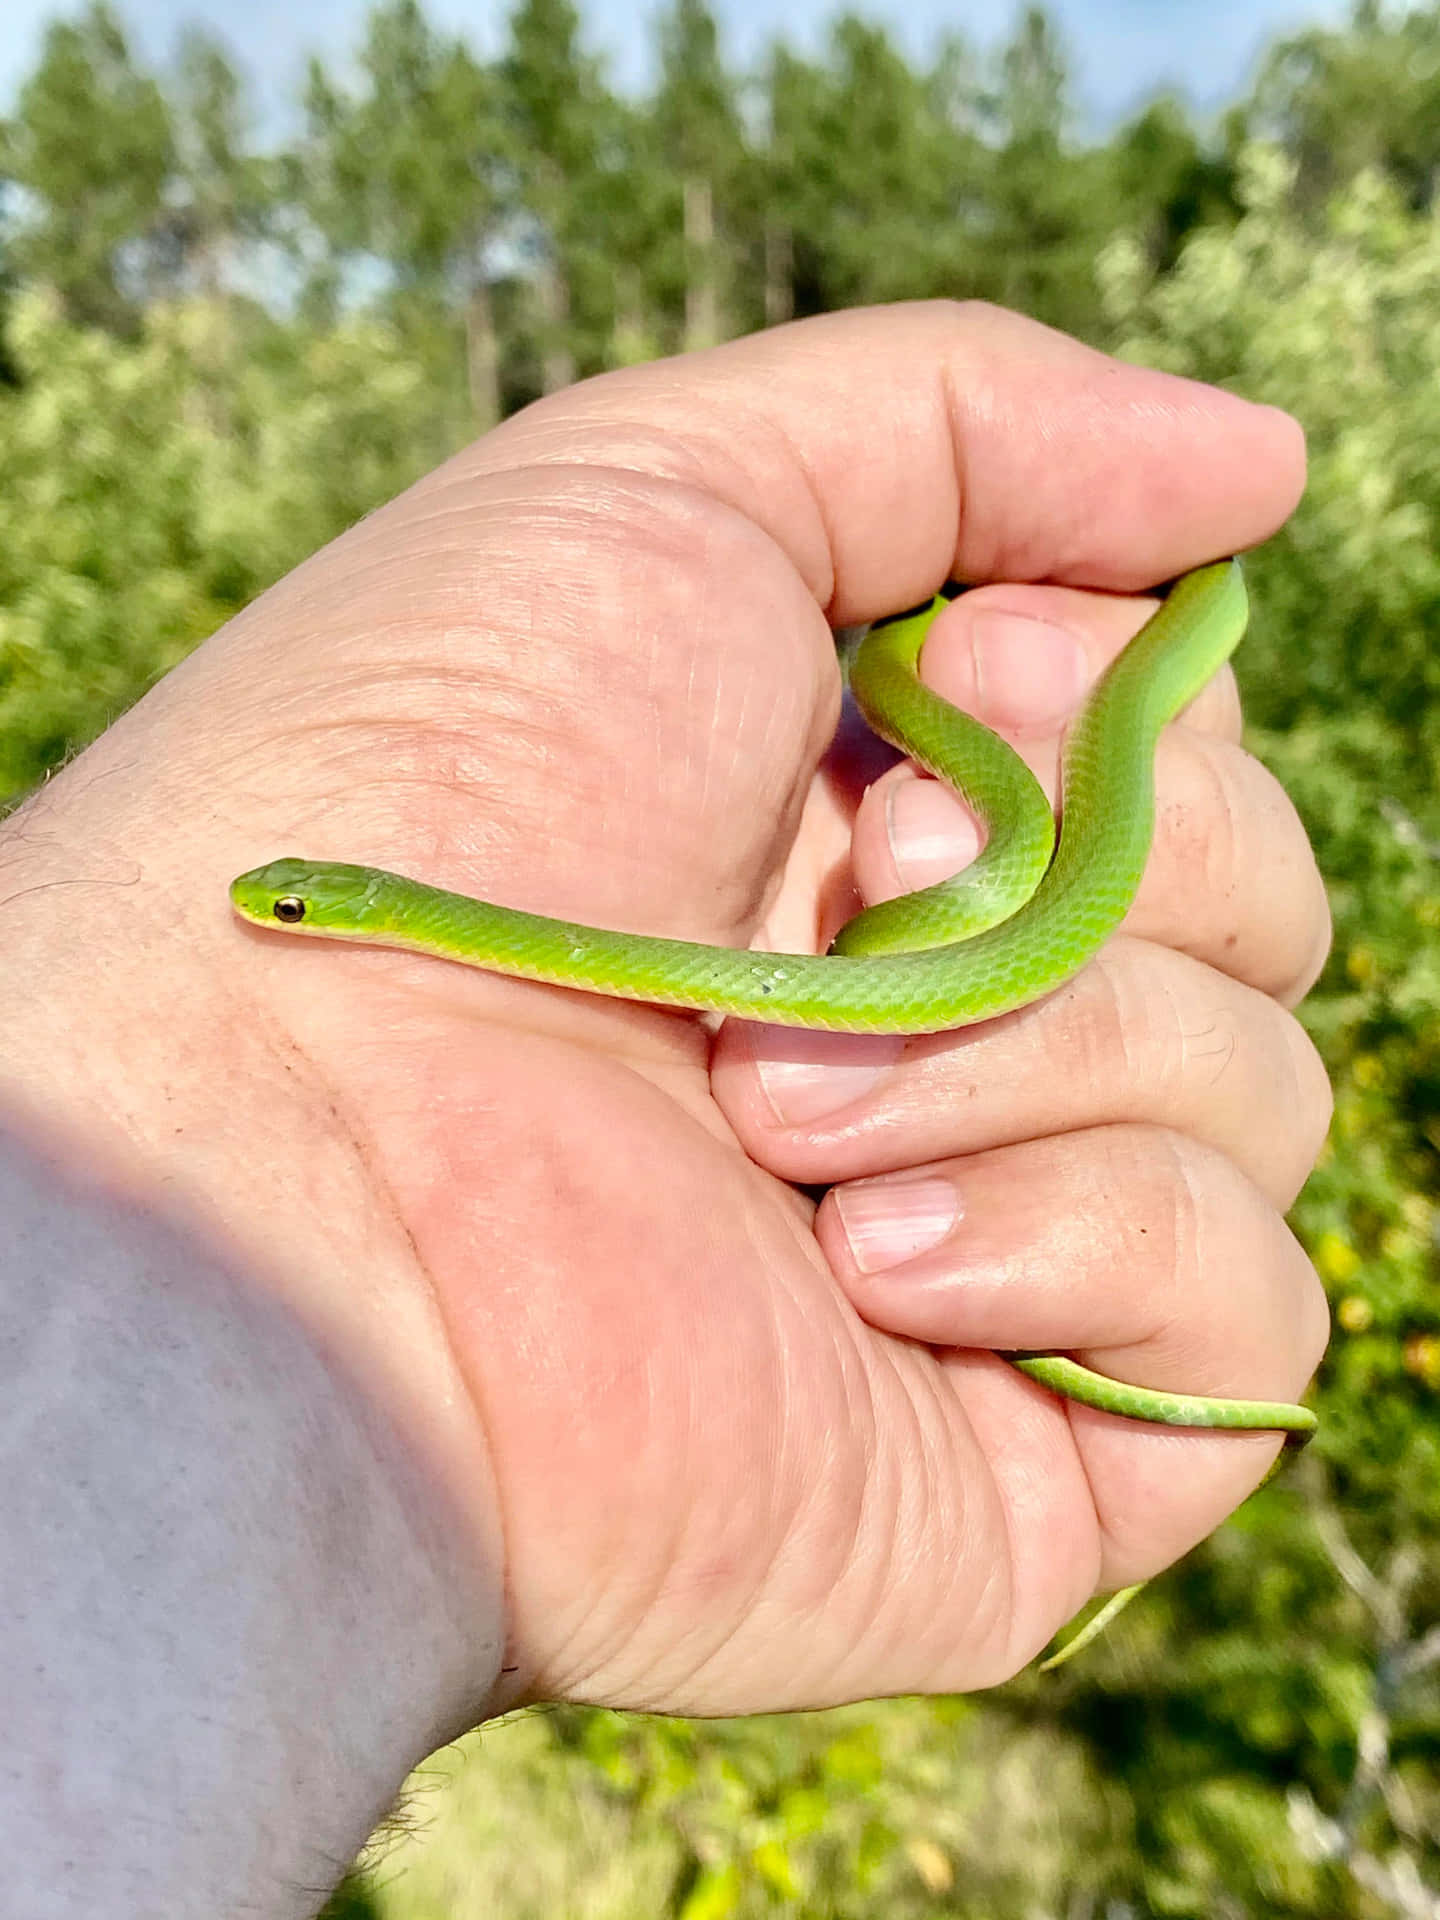 A Green Snake Is Held In A Person's Hand